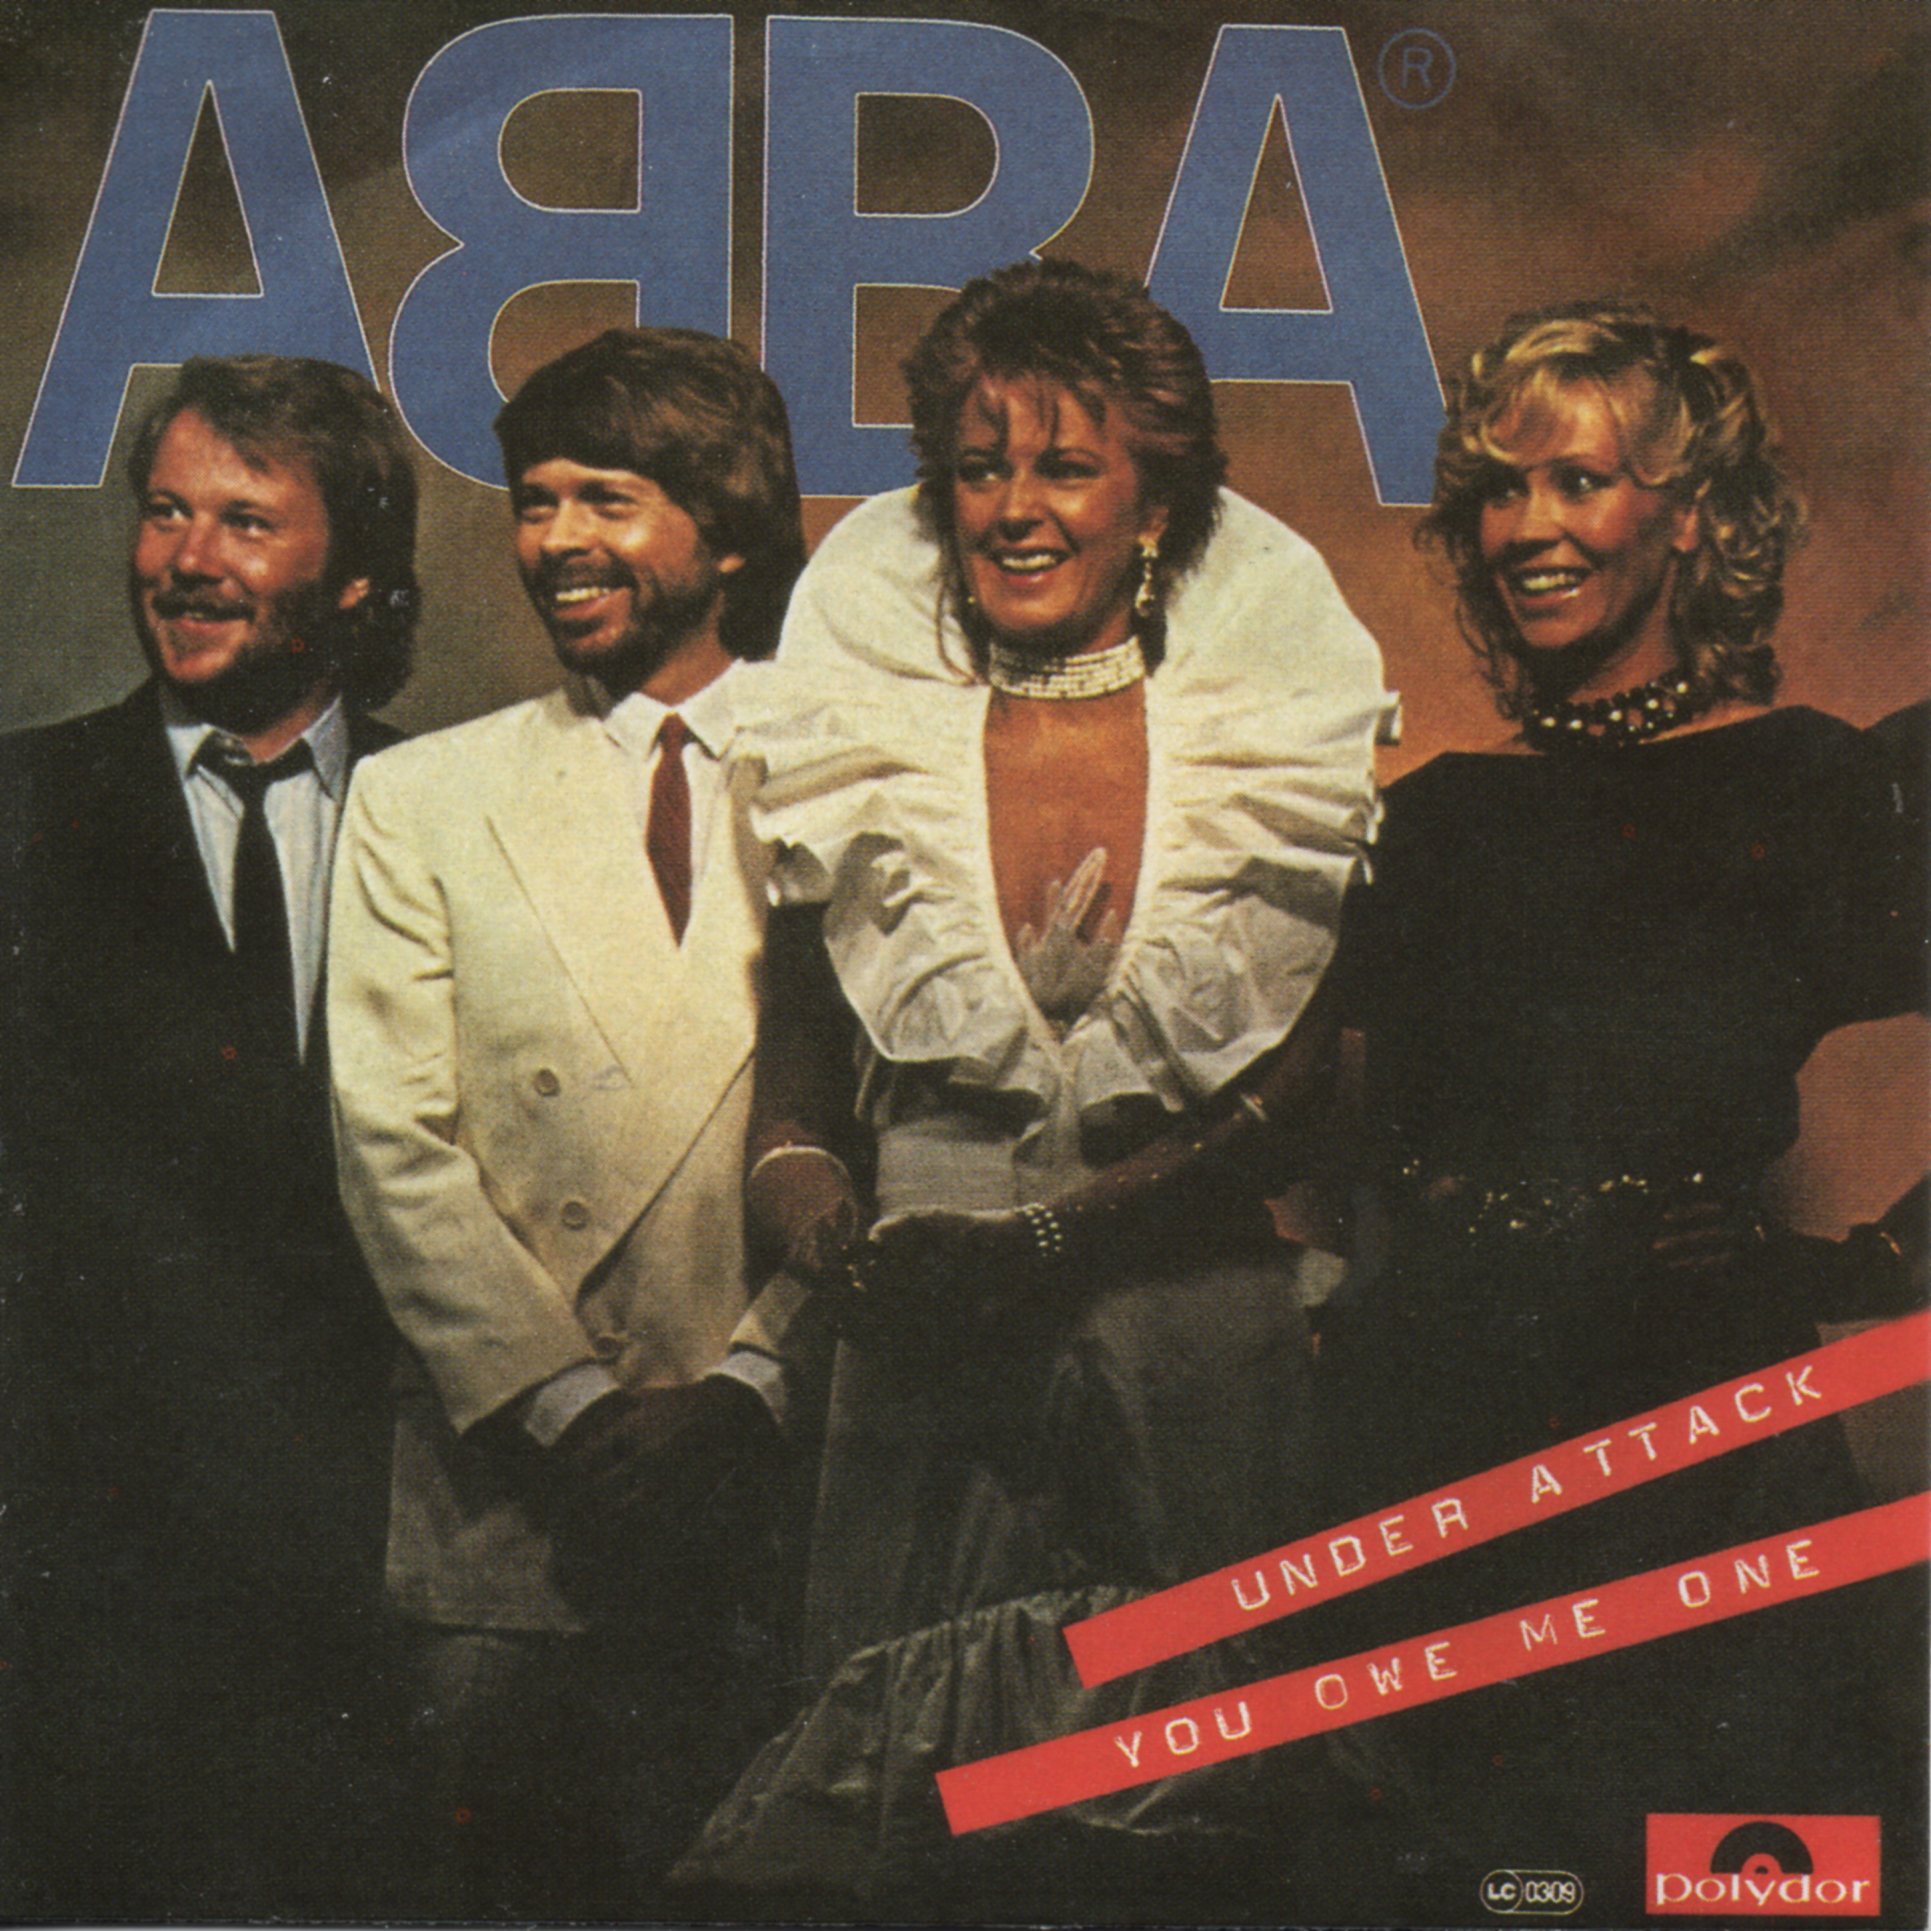 ABBA — You Owe Me One cover artwork